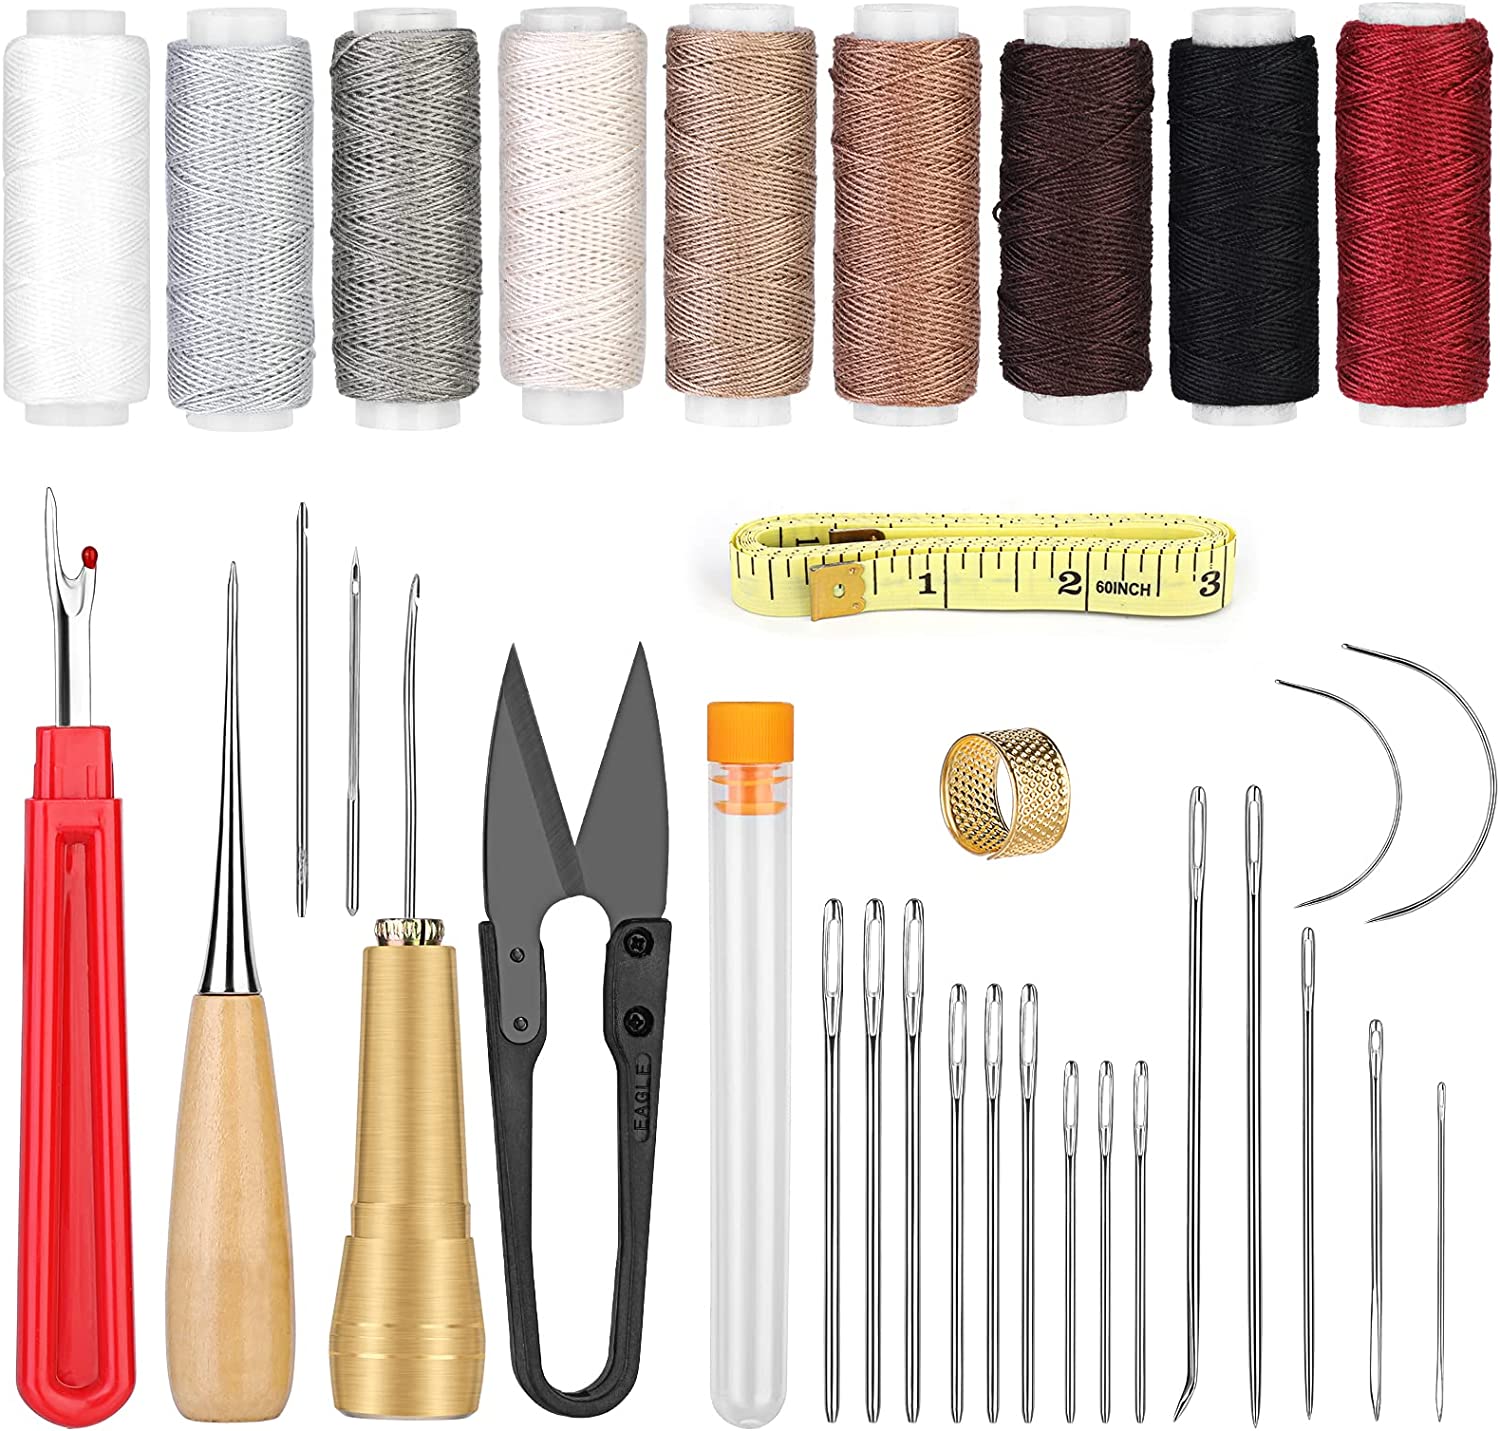 Leather Sewing Kit for Beginners Leather Sewing Awl 34 PCS Leather ...